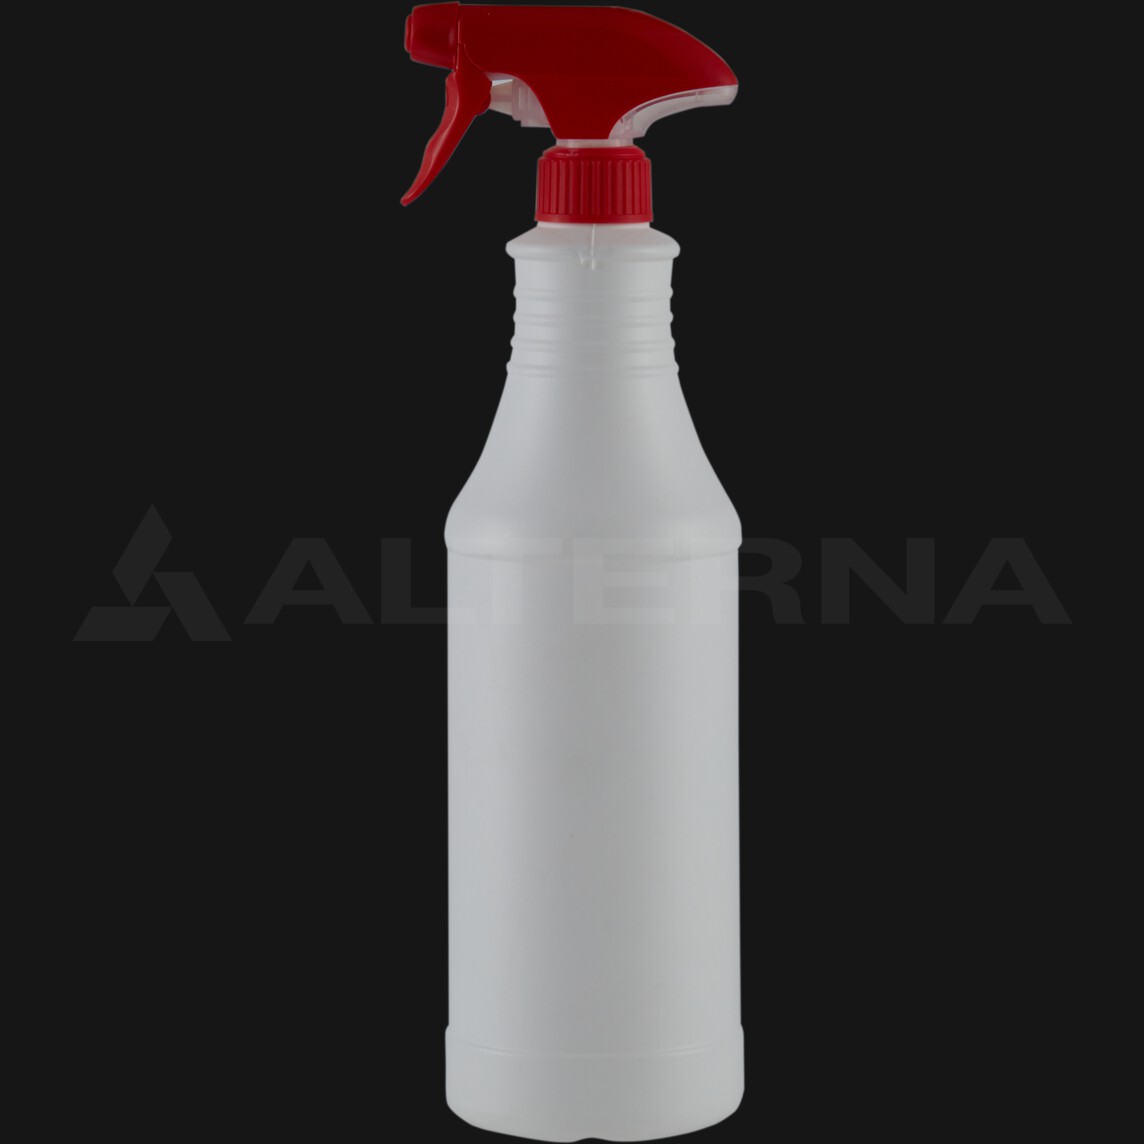 1000 ml HDPE Spray Bottle with 28 mm Trigger